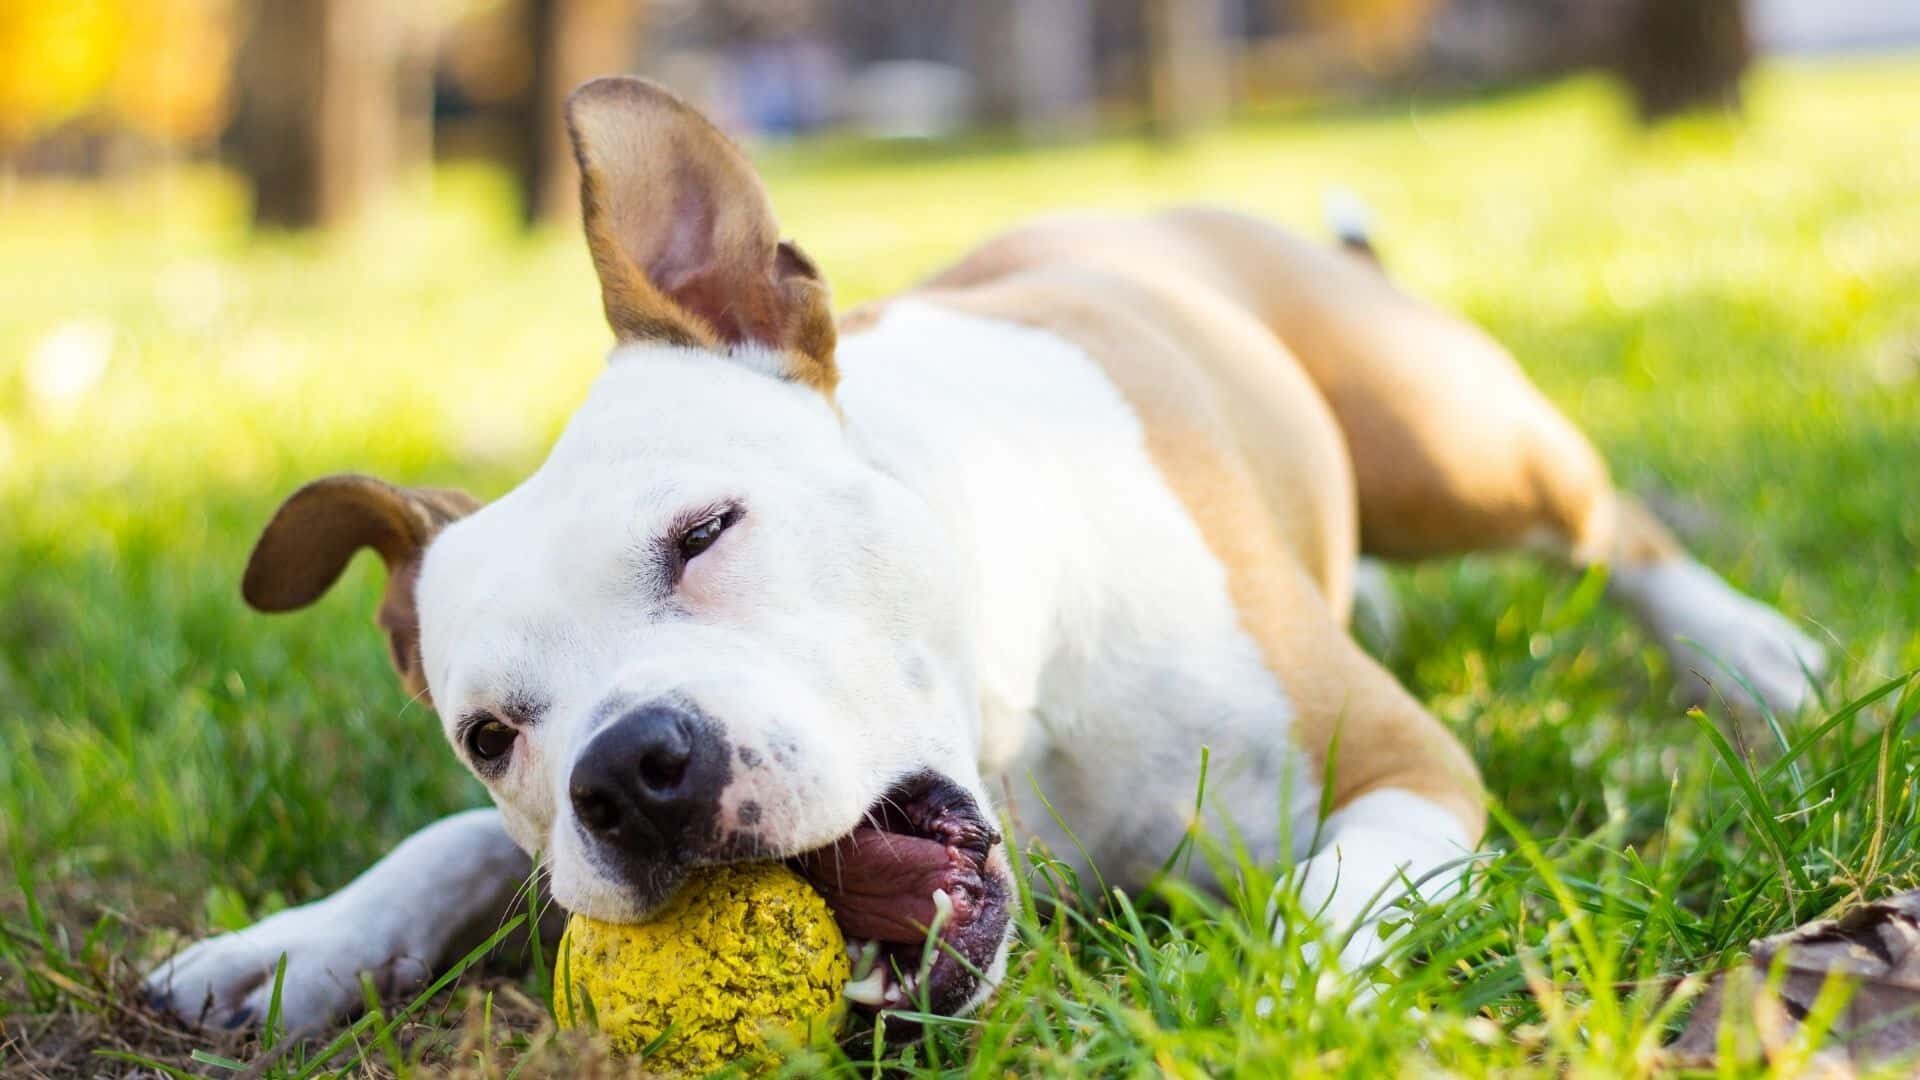 Why do dogs like balls?